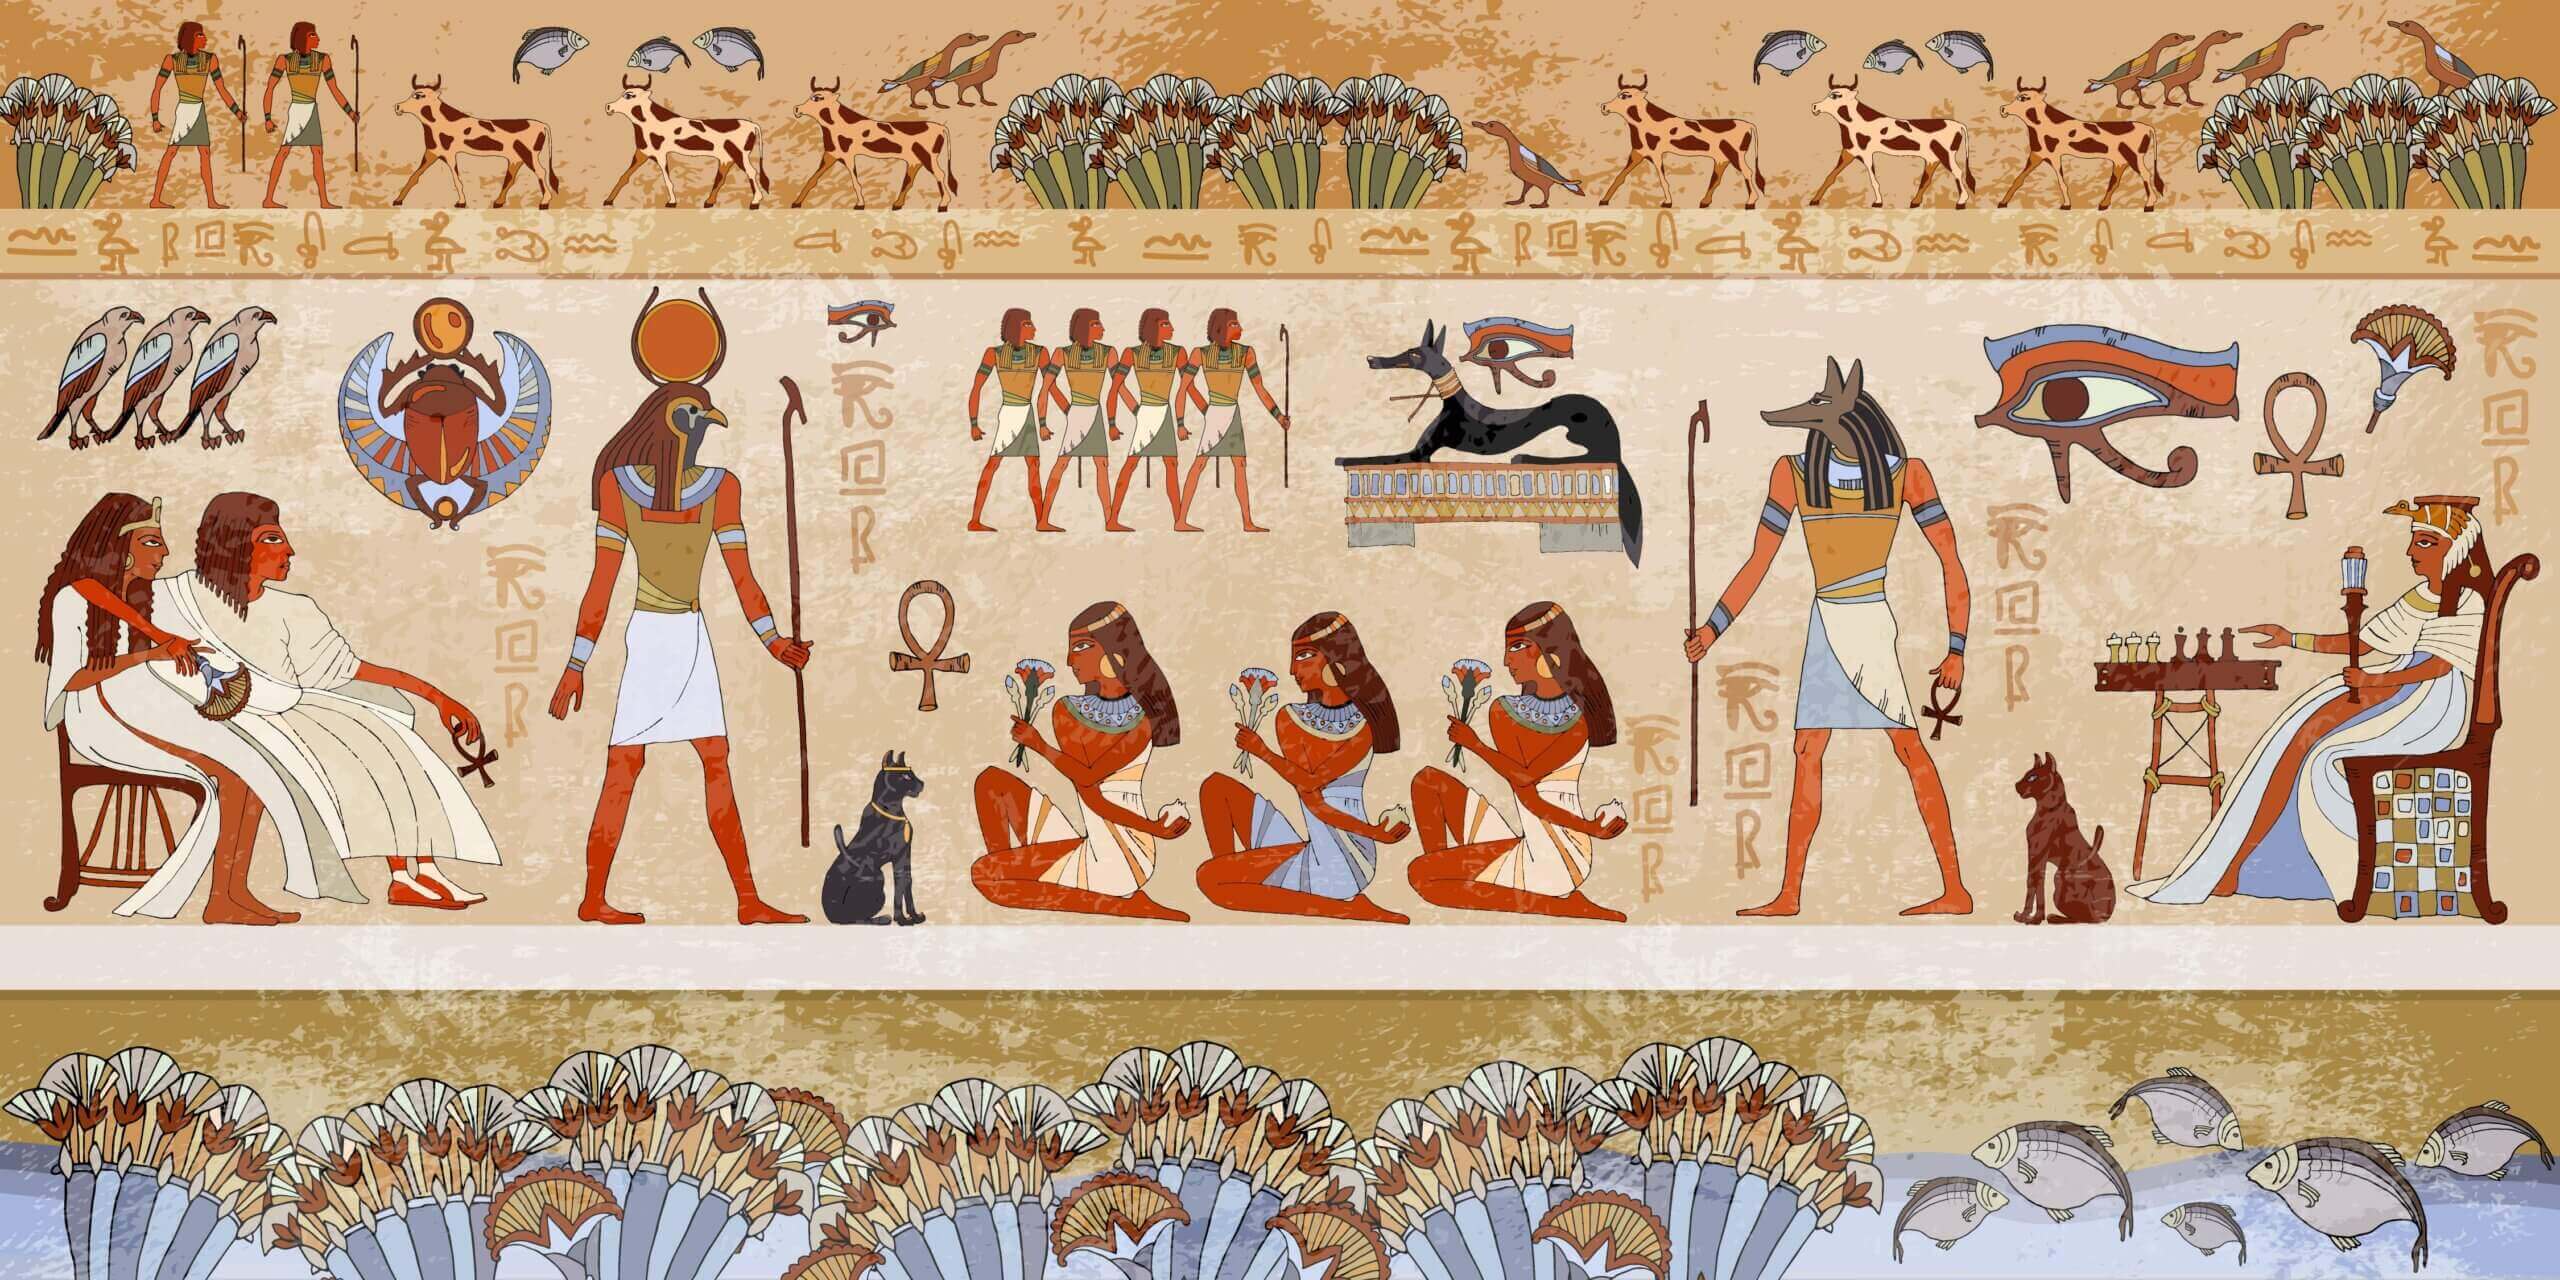 A painting from ancient Egypt.